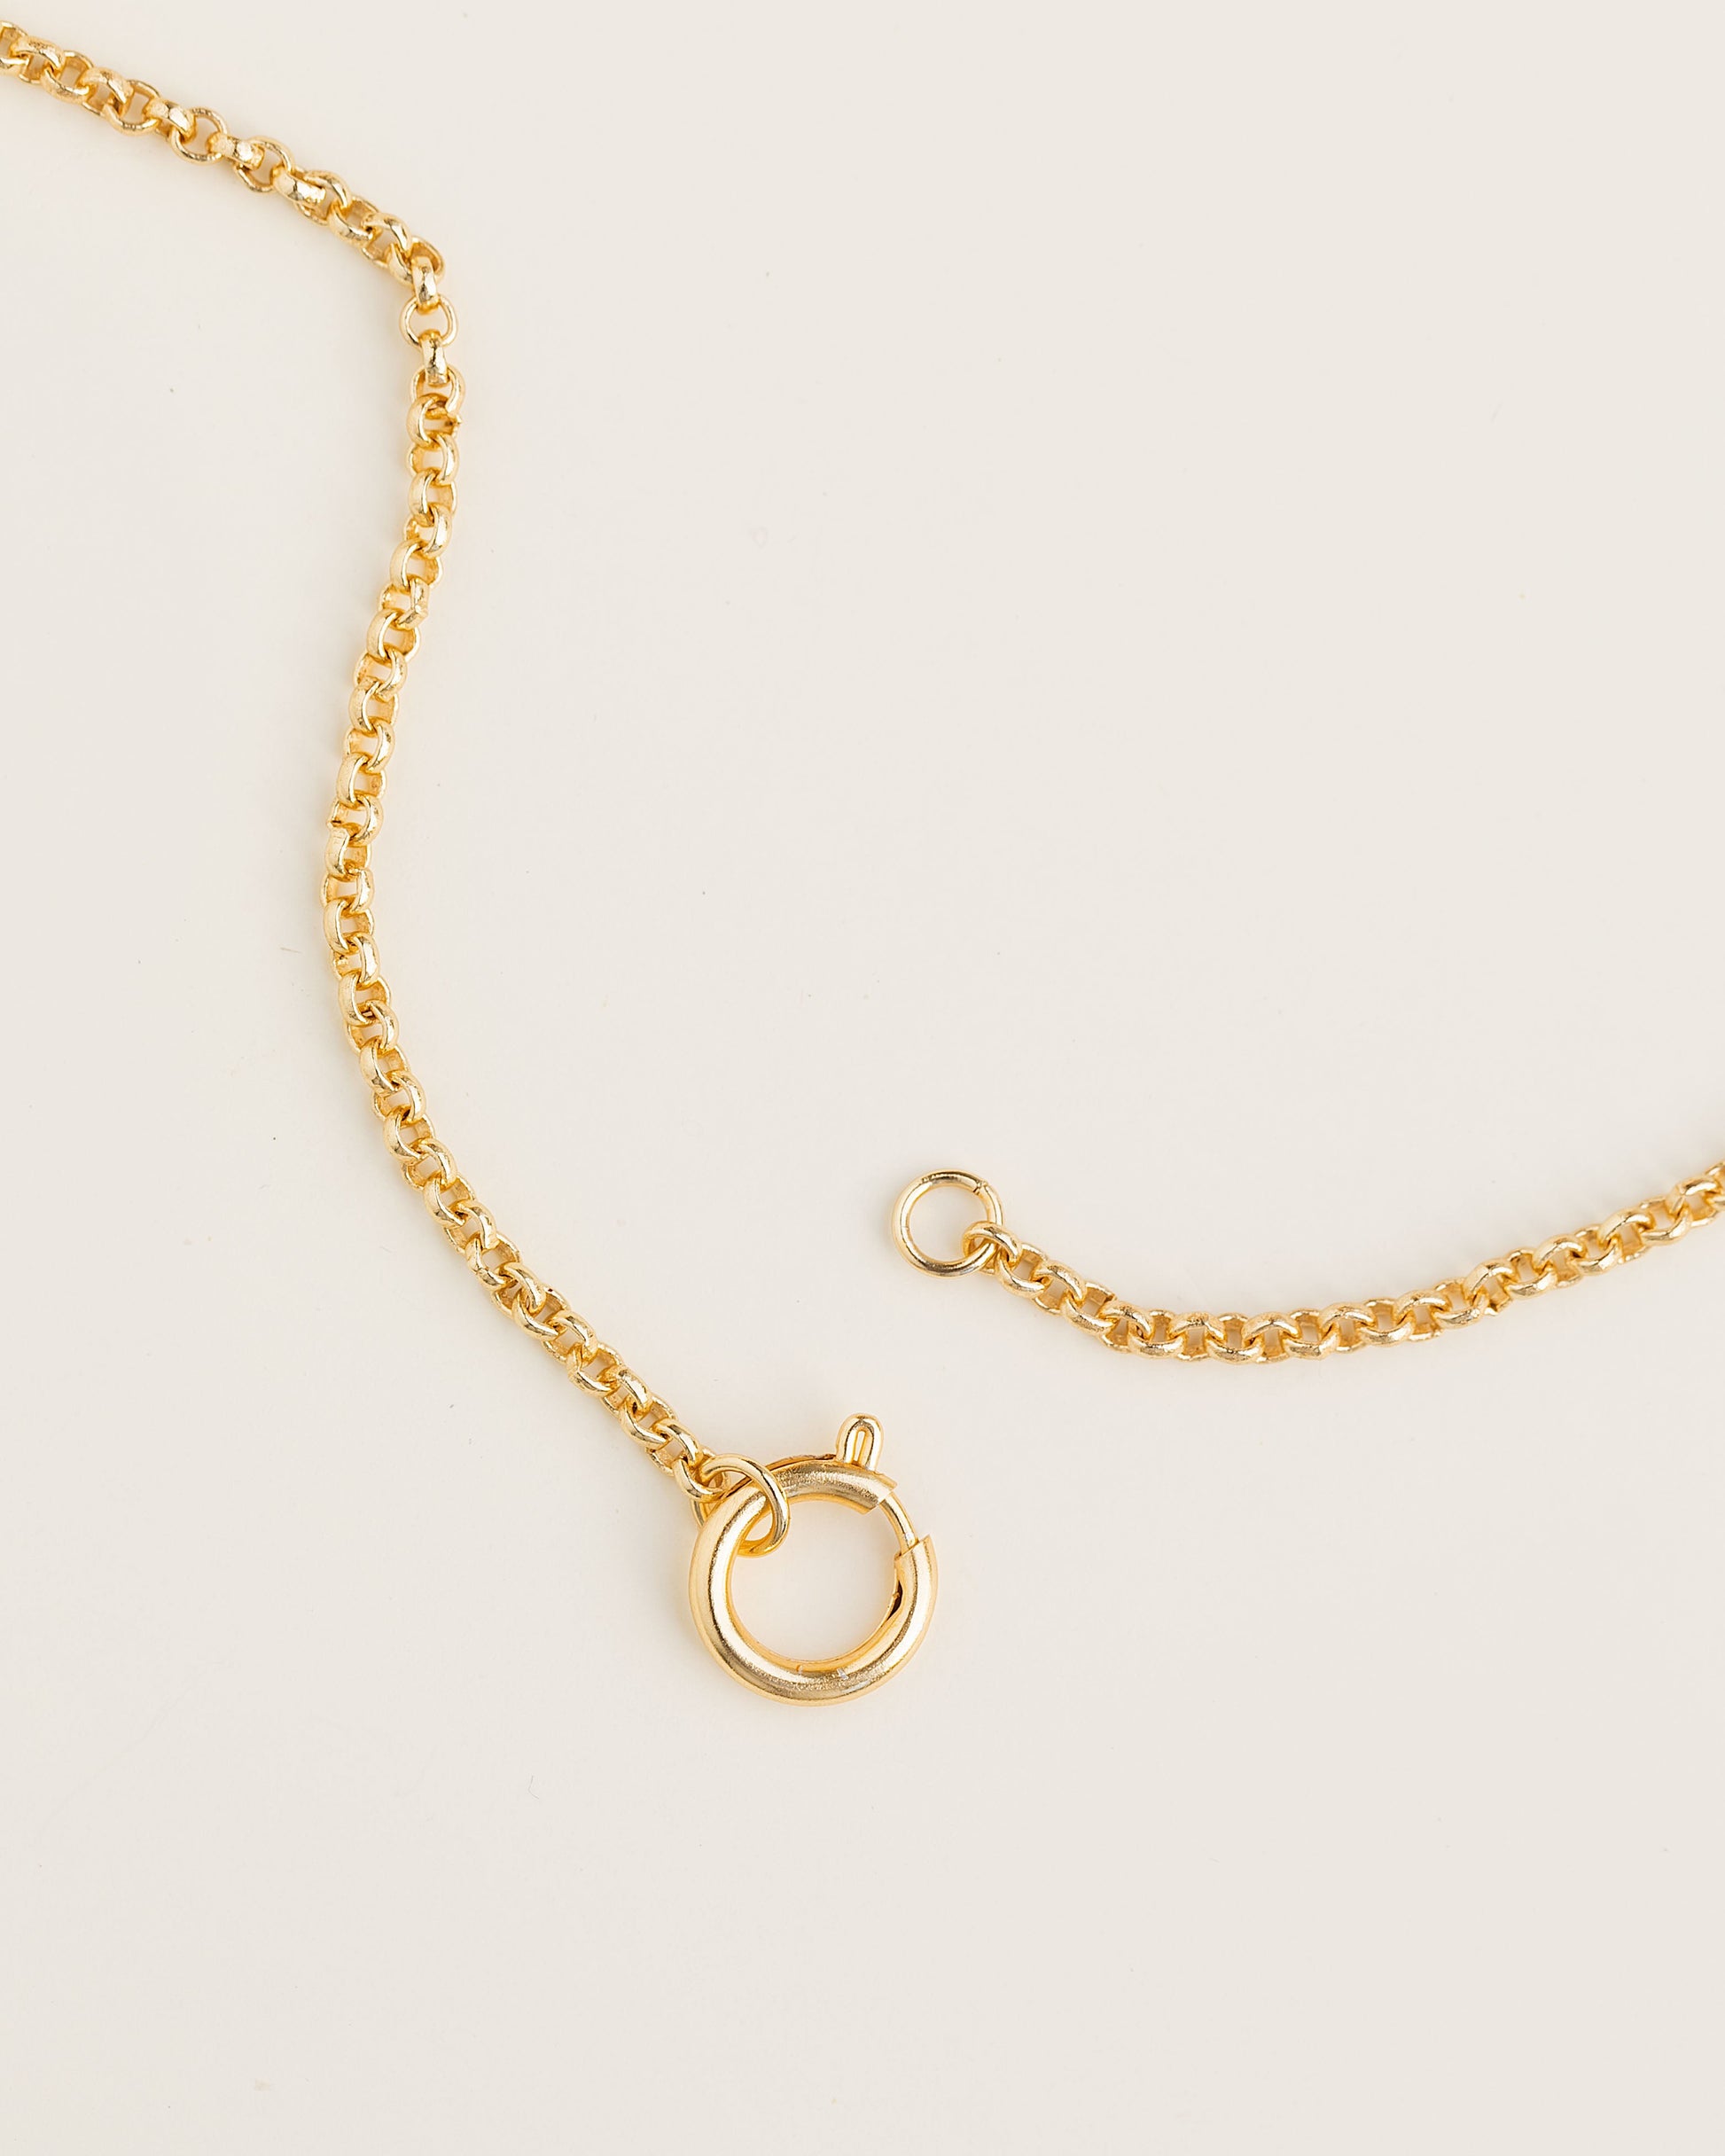 Heirloom Charming Necklace - Gold - Trades of Hope 